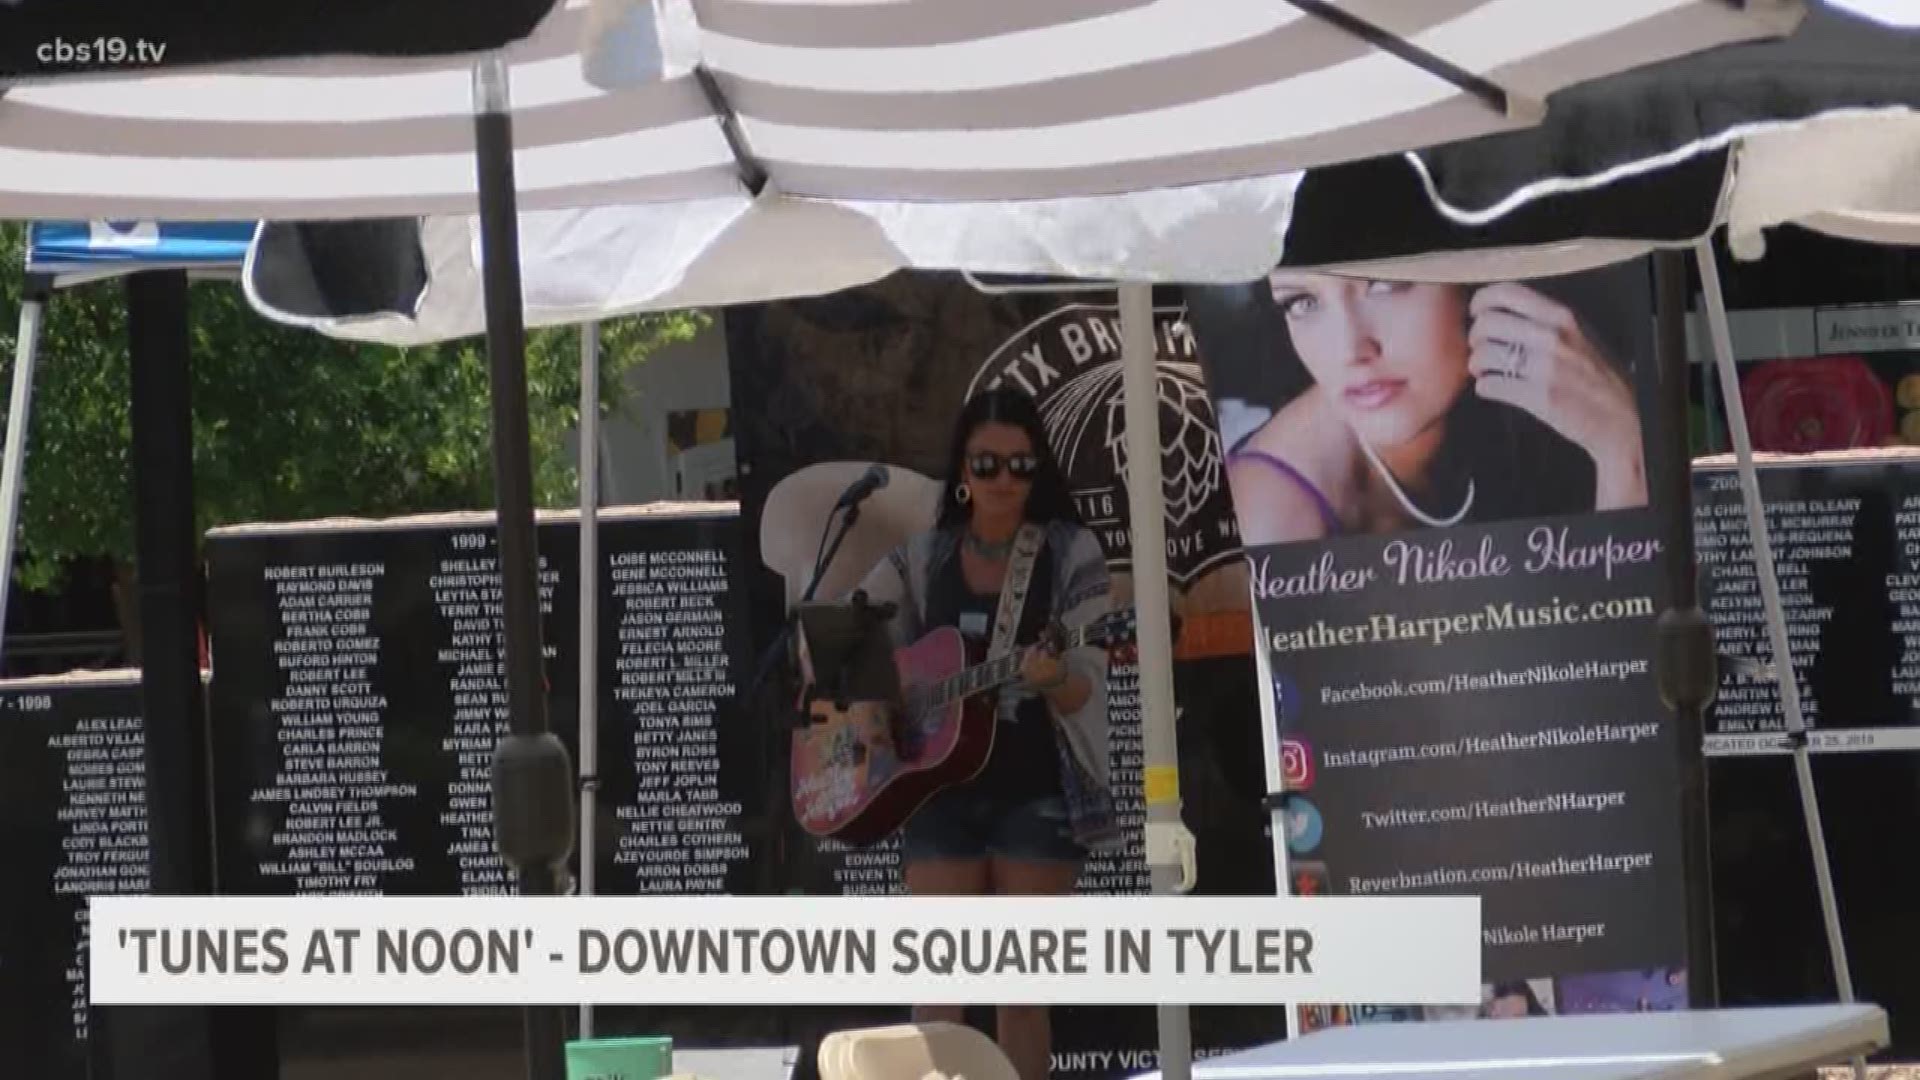 The City of Tyler's Main Street program is hoping to attract more people to the downtown area. 'Tunes at Noon' features live music and food trucks every Thursday.